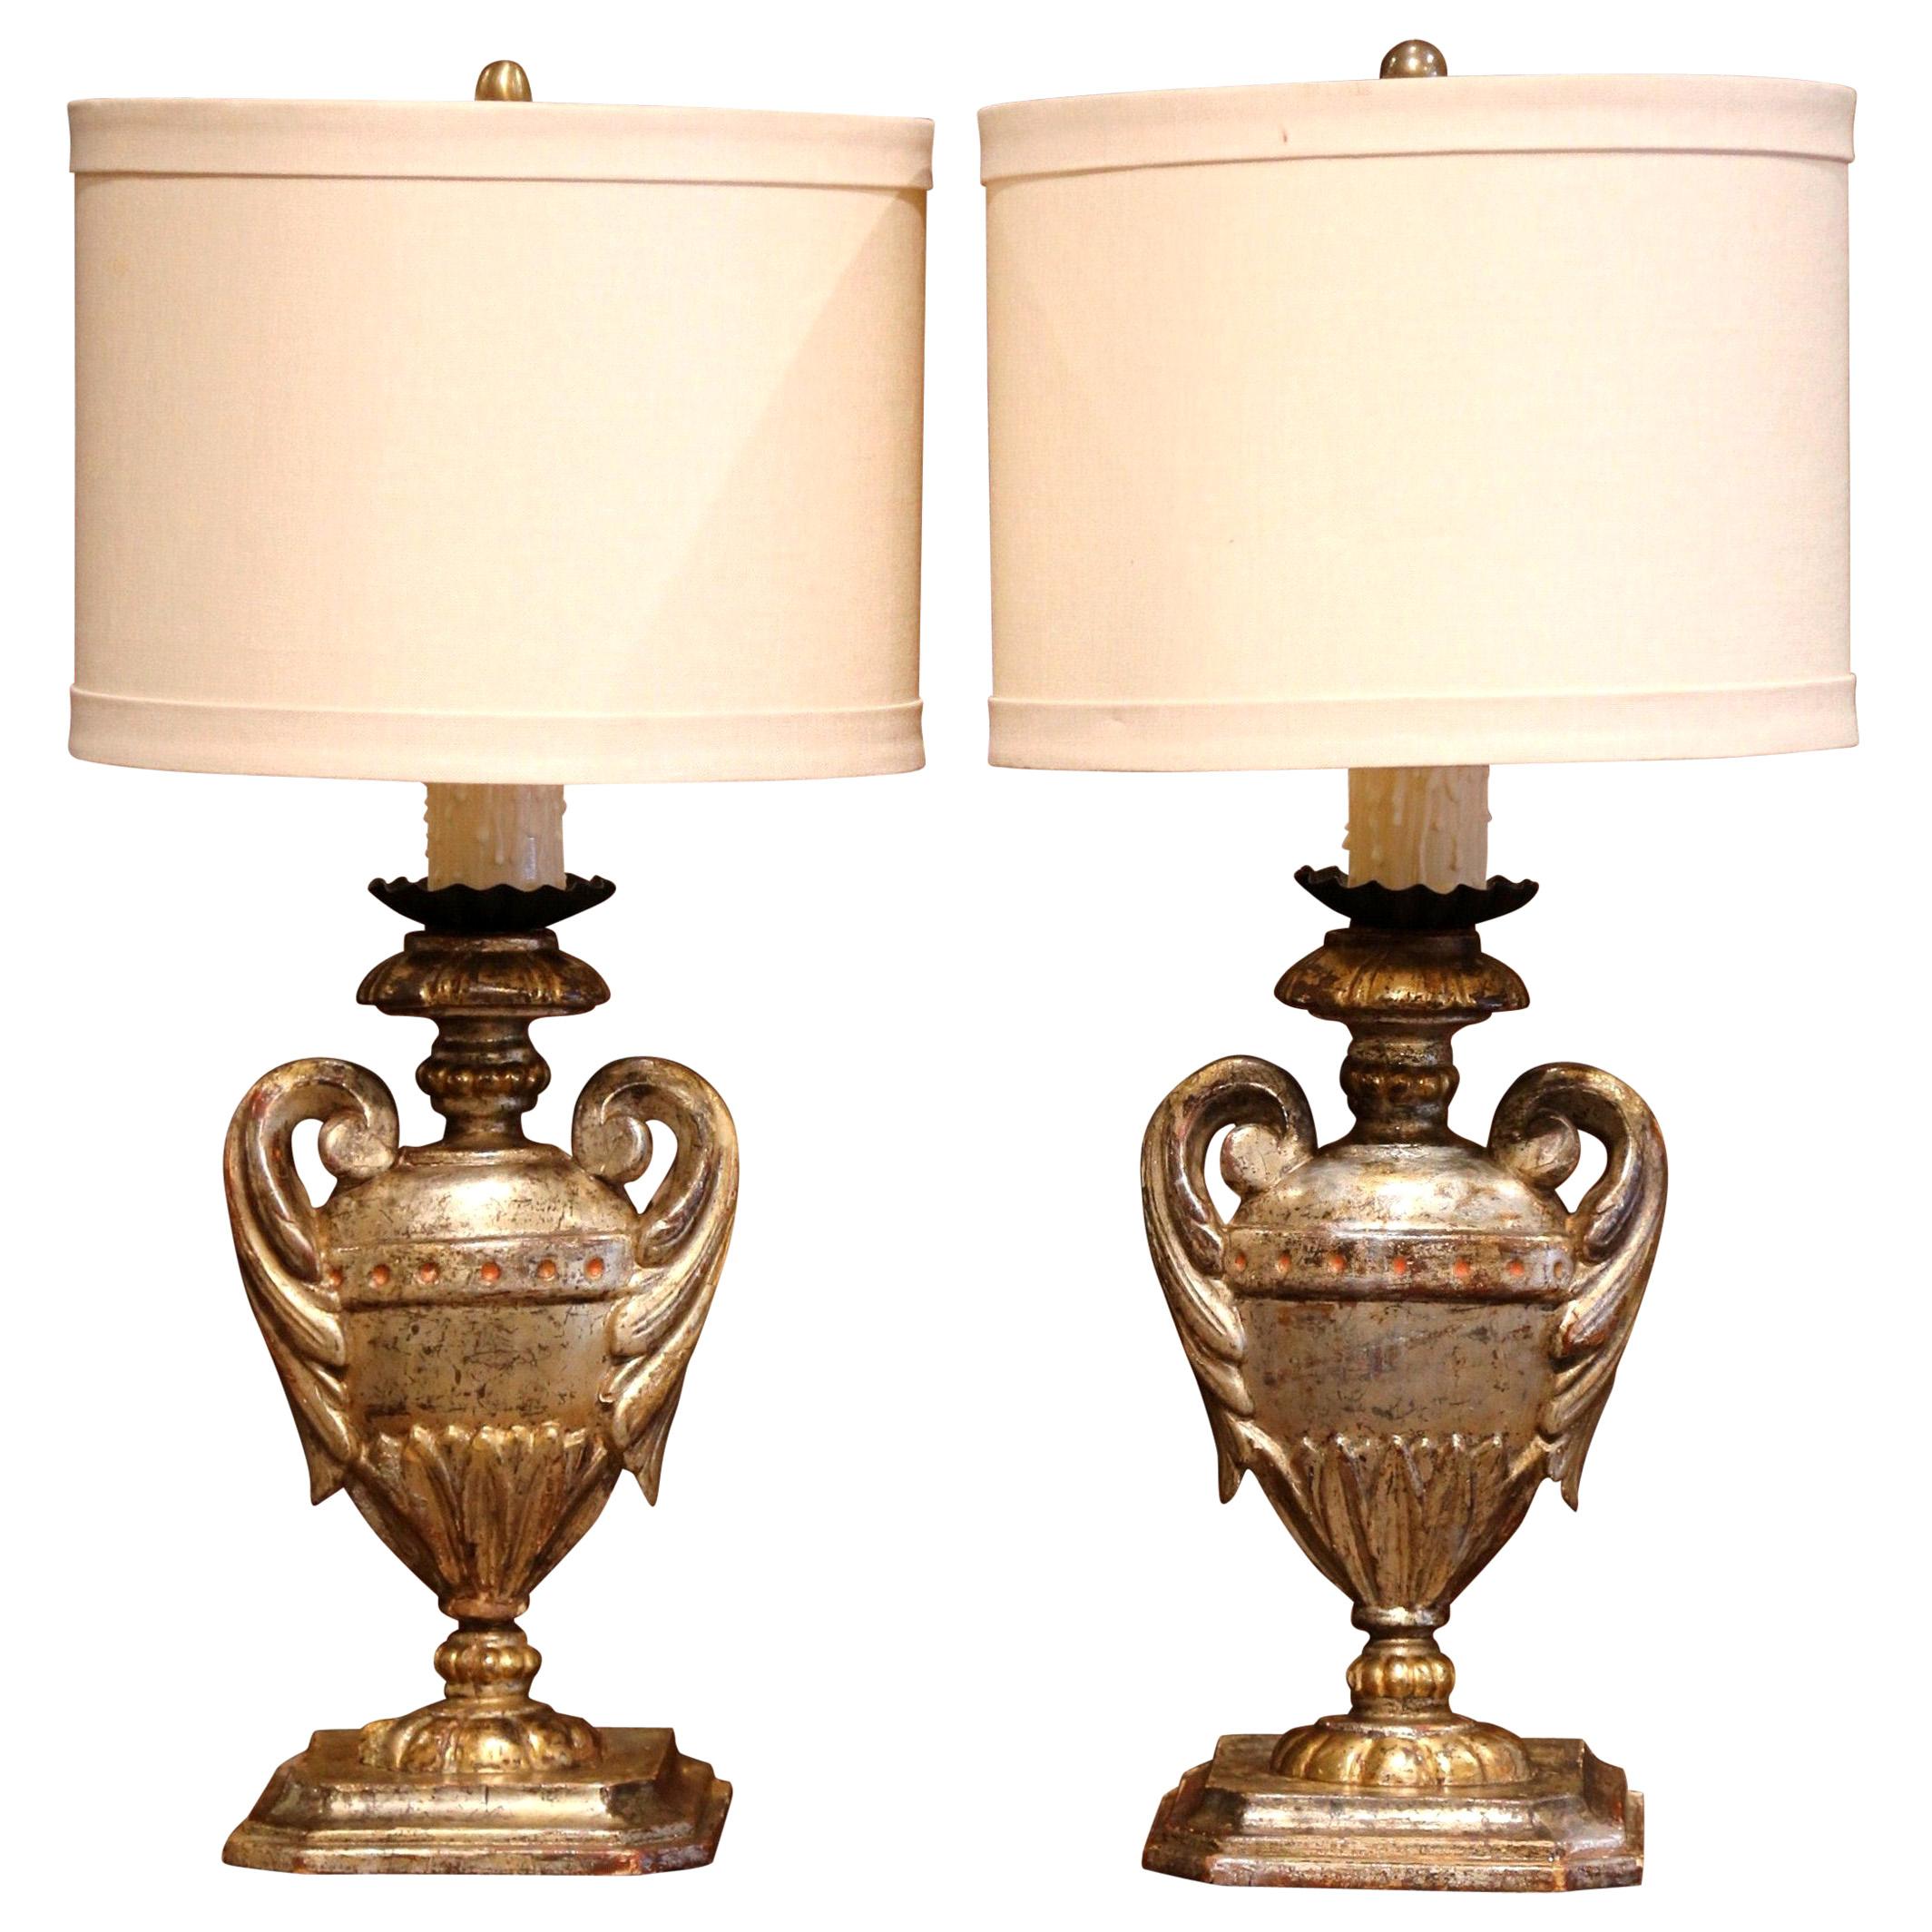 Pair of Early 20th Century Italian Carved Patinated Silver and Gilt Table Lamps